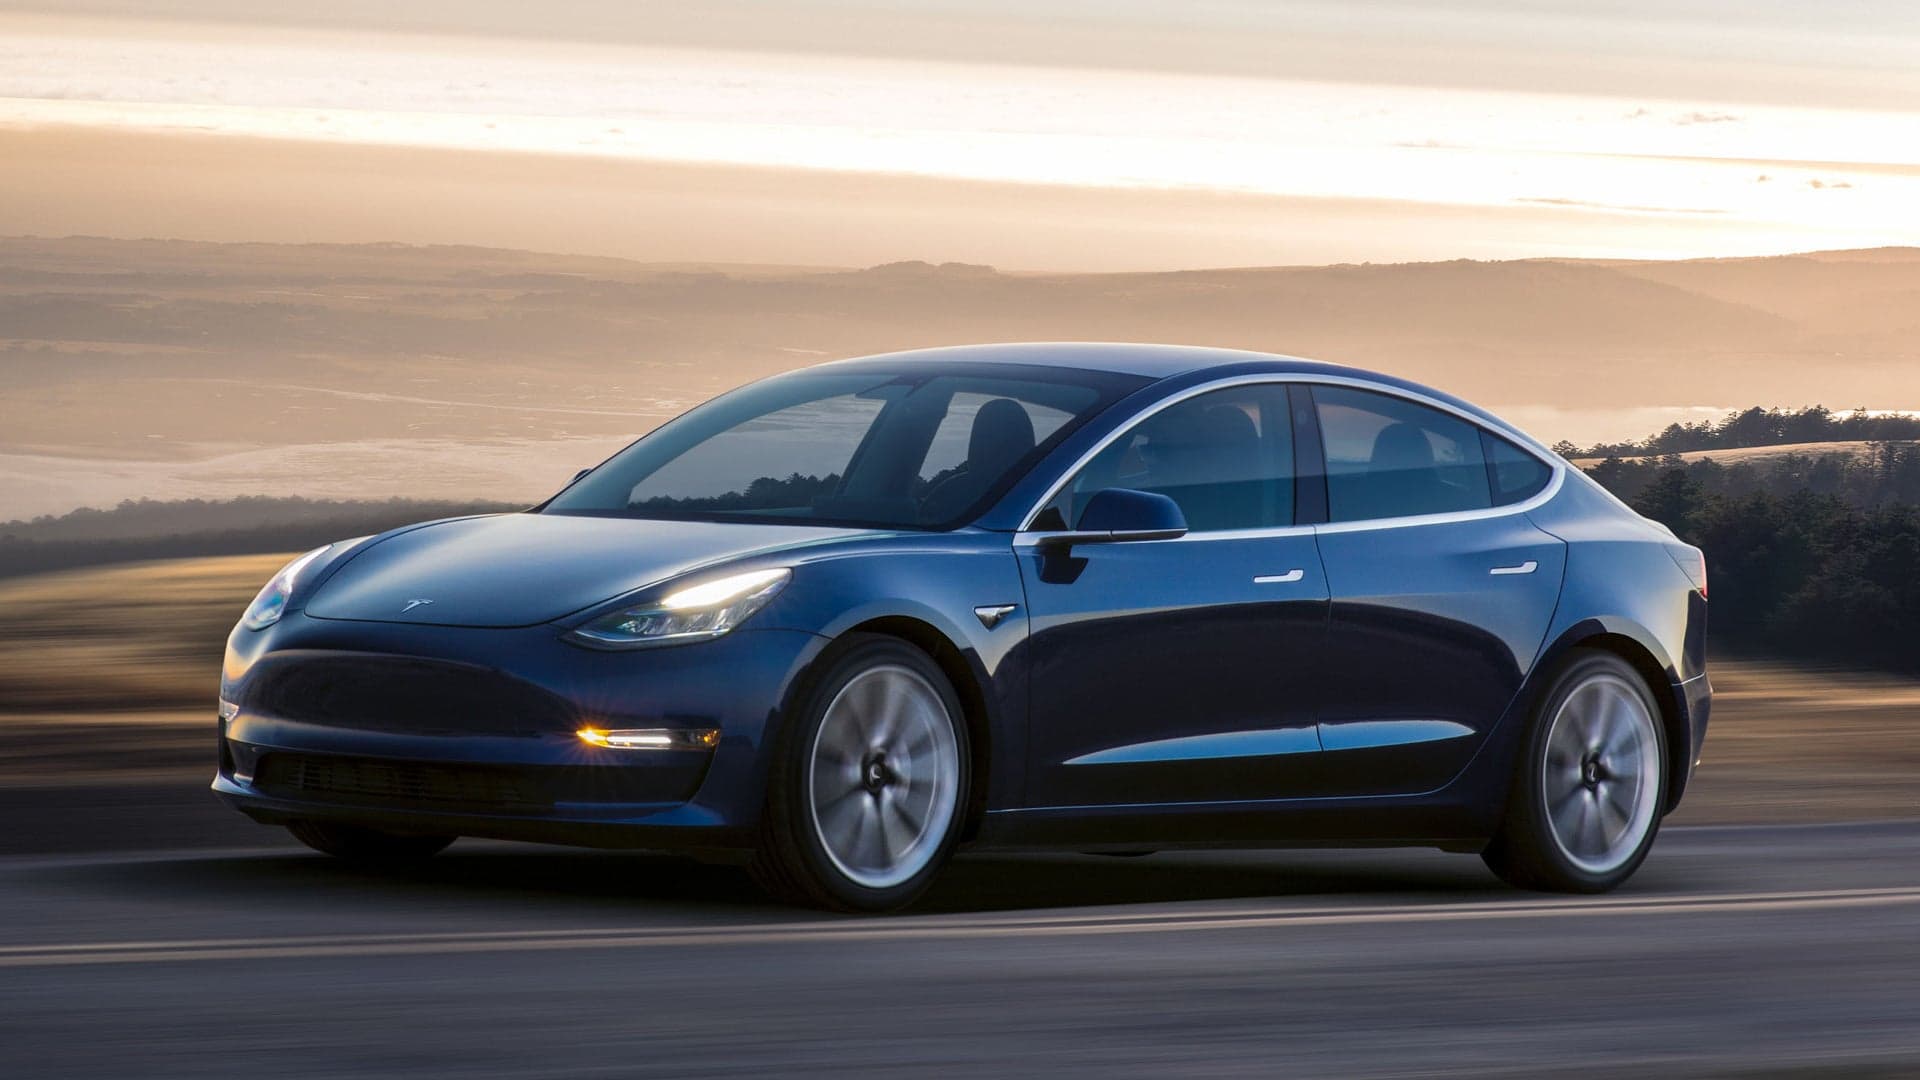 Giveaway: The Sixth Tesla Model 3 Ever Built ‘Could Be Yours’